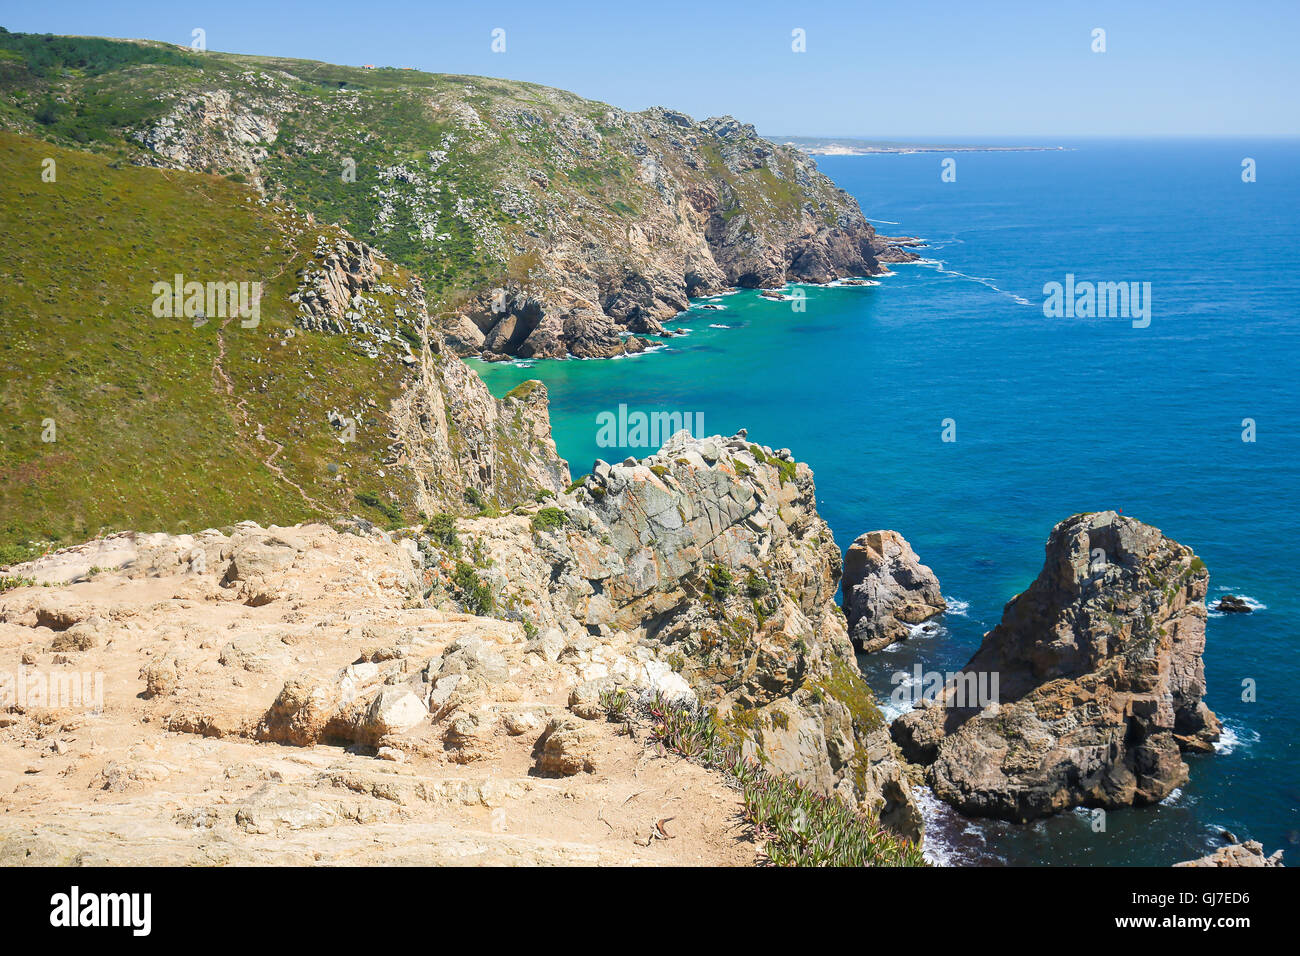 Cabo da Roca is a cape located close to Lisbon which forms the westernmost extent of mainland Portugal and continental Europe. Stock Photo